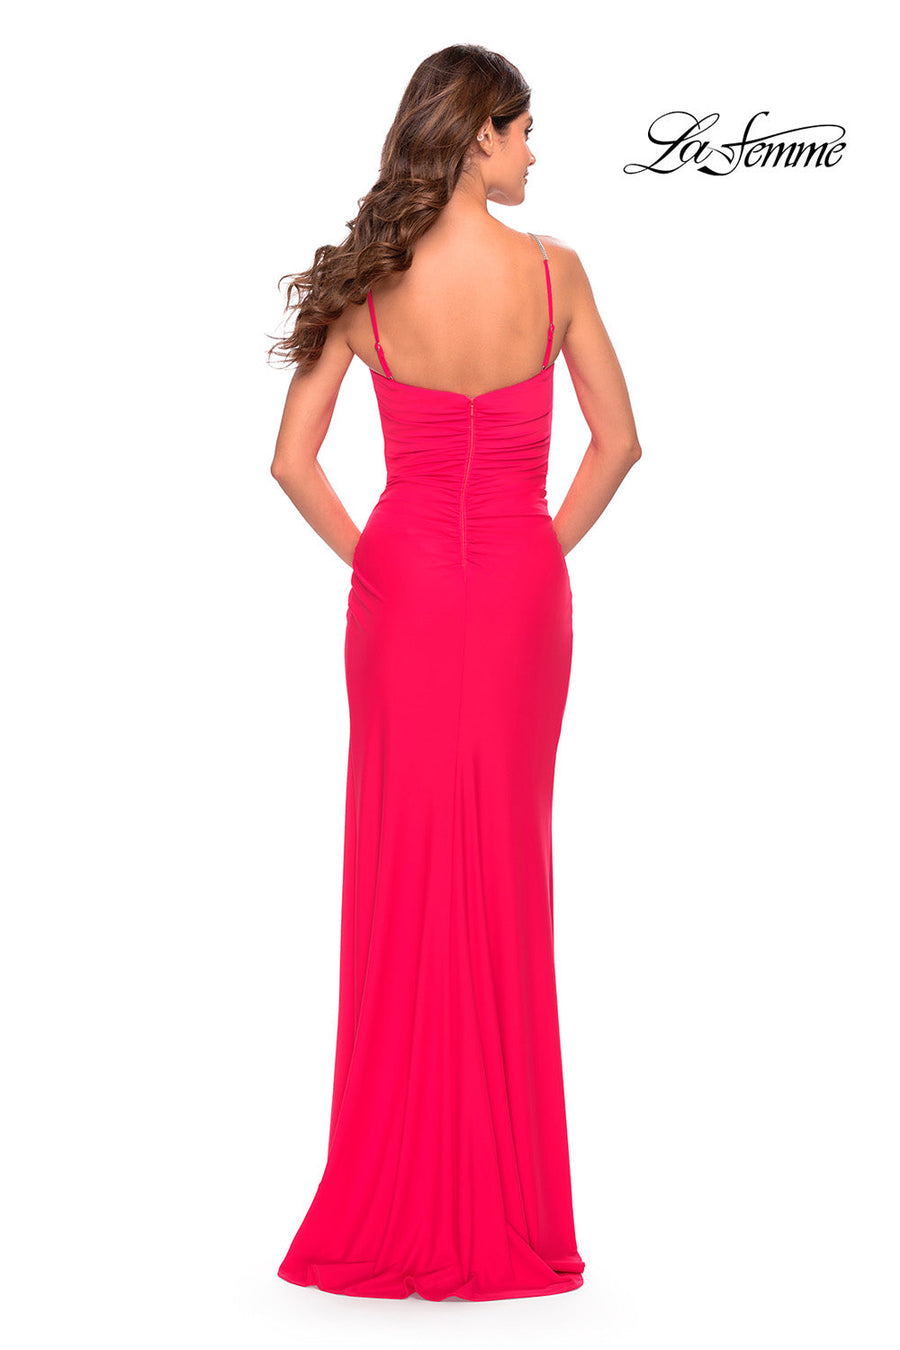 La Femme 31224 prom dress images.  La Femme 31224 is available in these colors: Hot Coral.